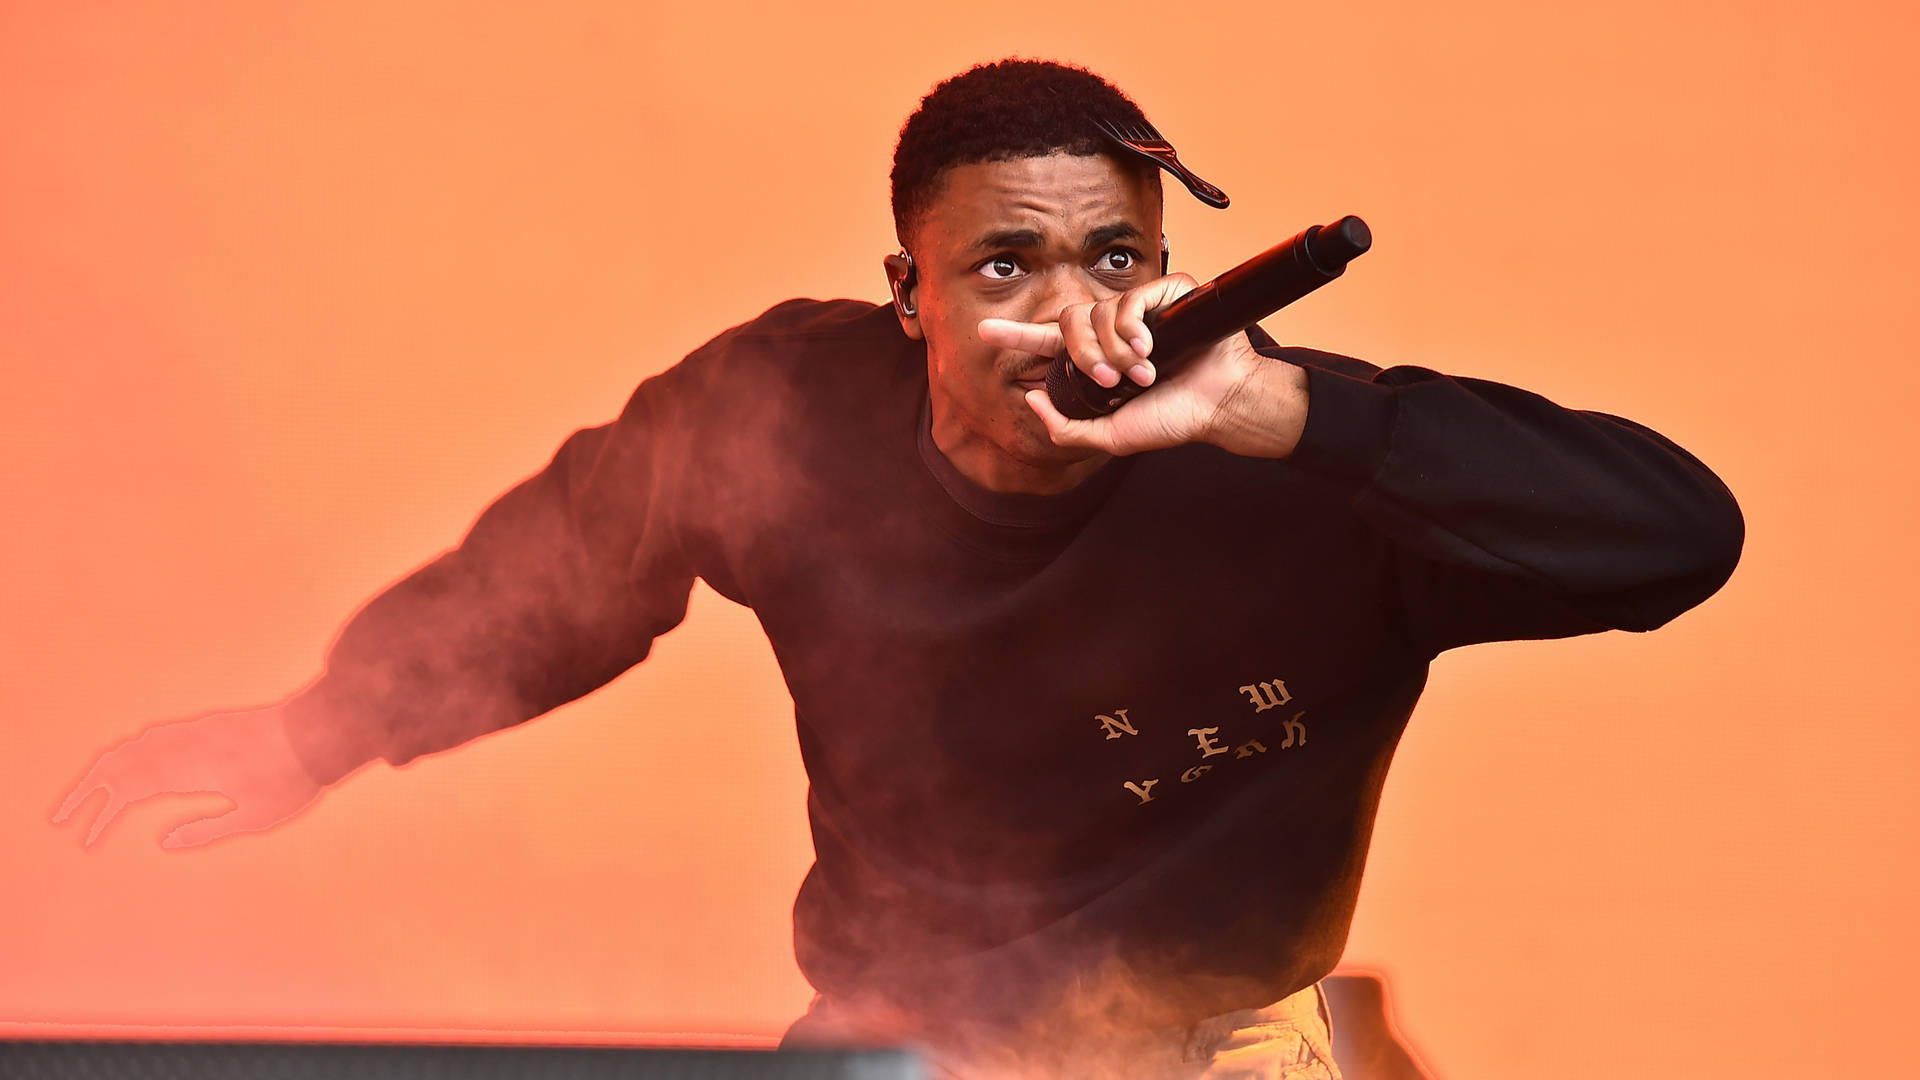 Aesthetic Vince Staples Background